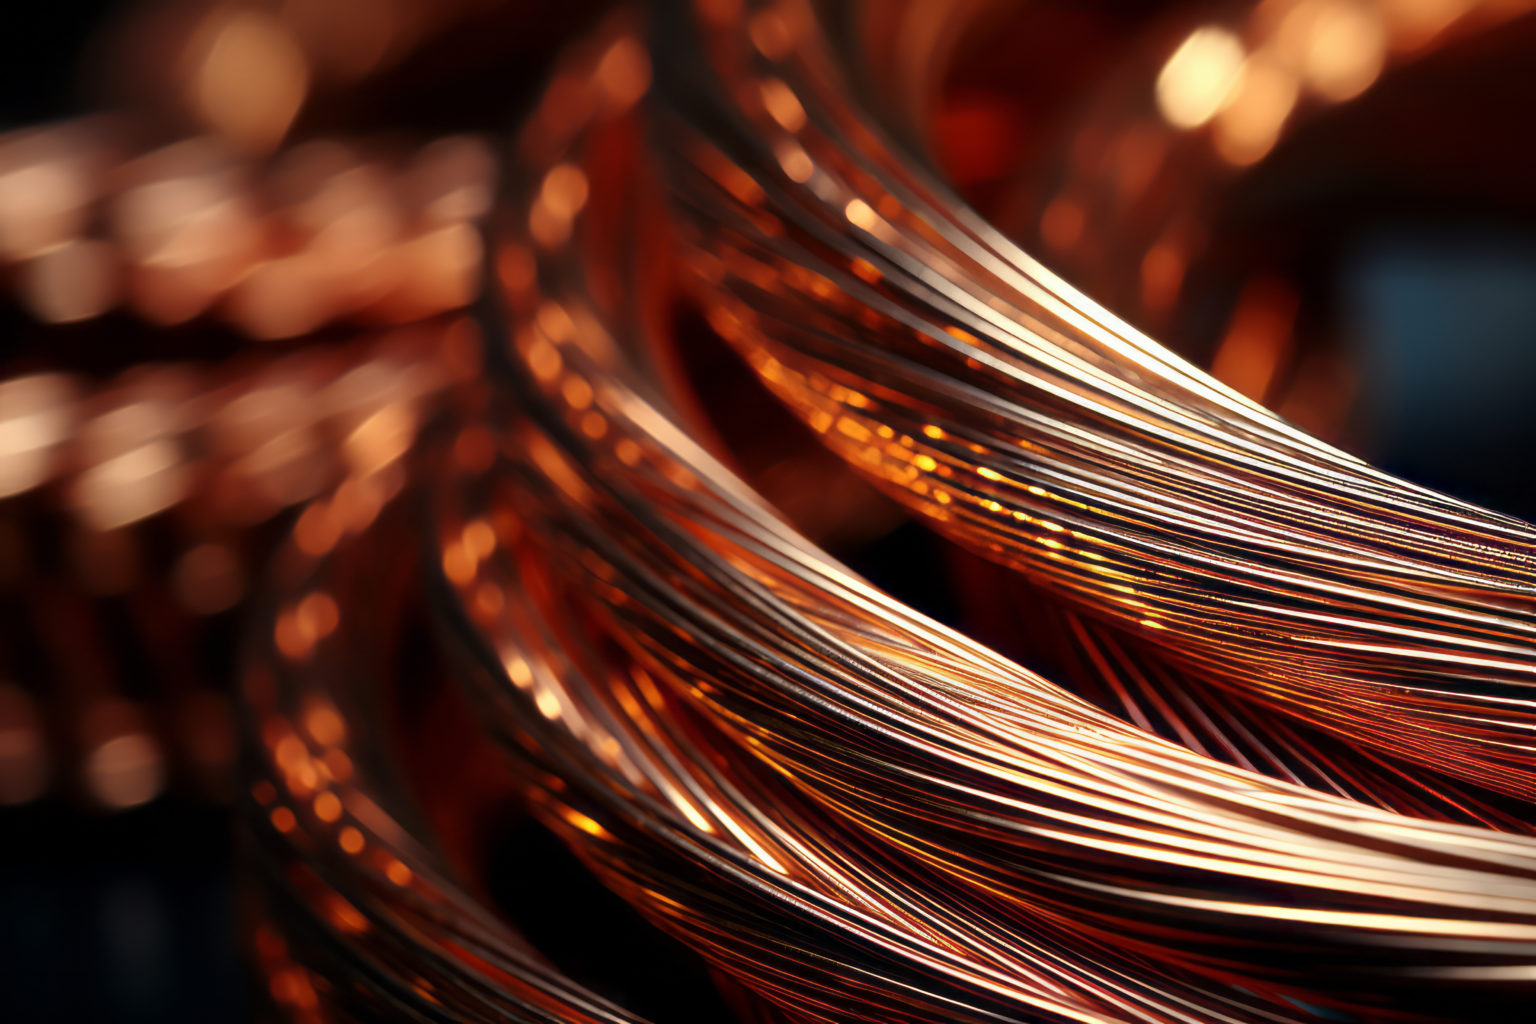 Funds sell copper as weak demand trumps supply pressures